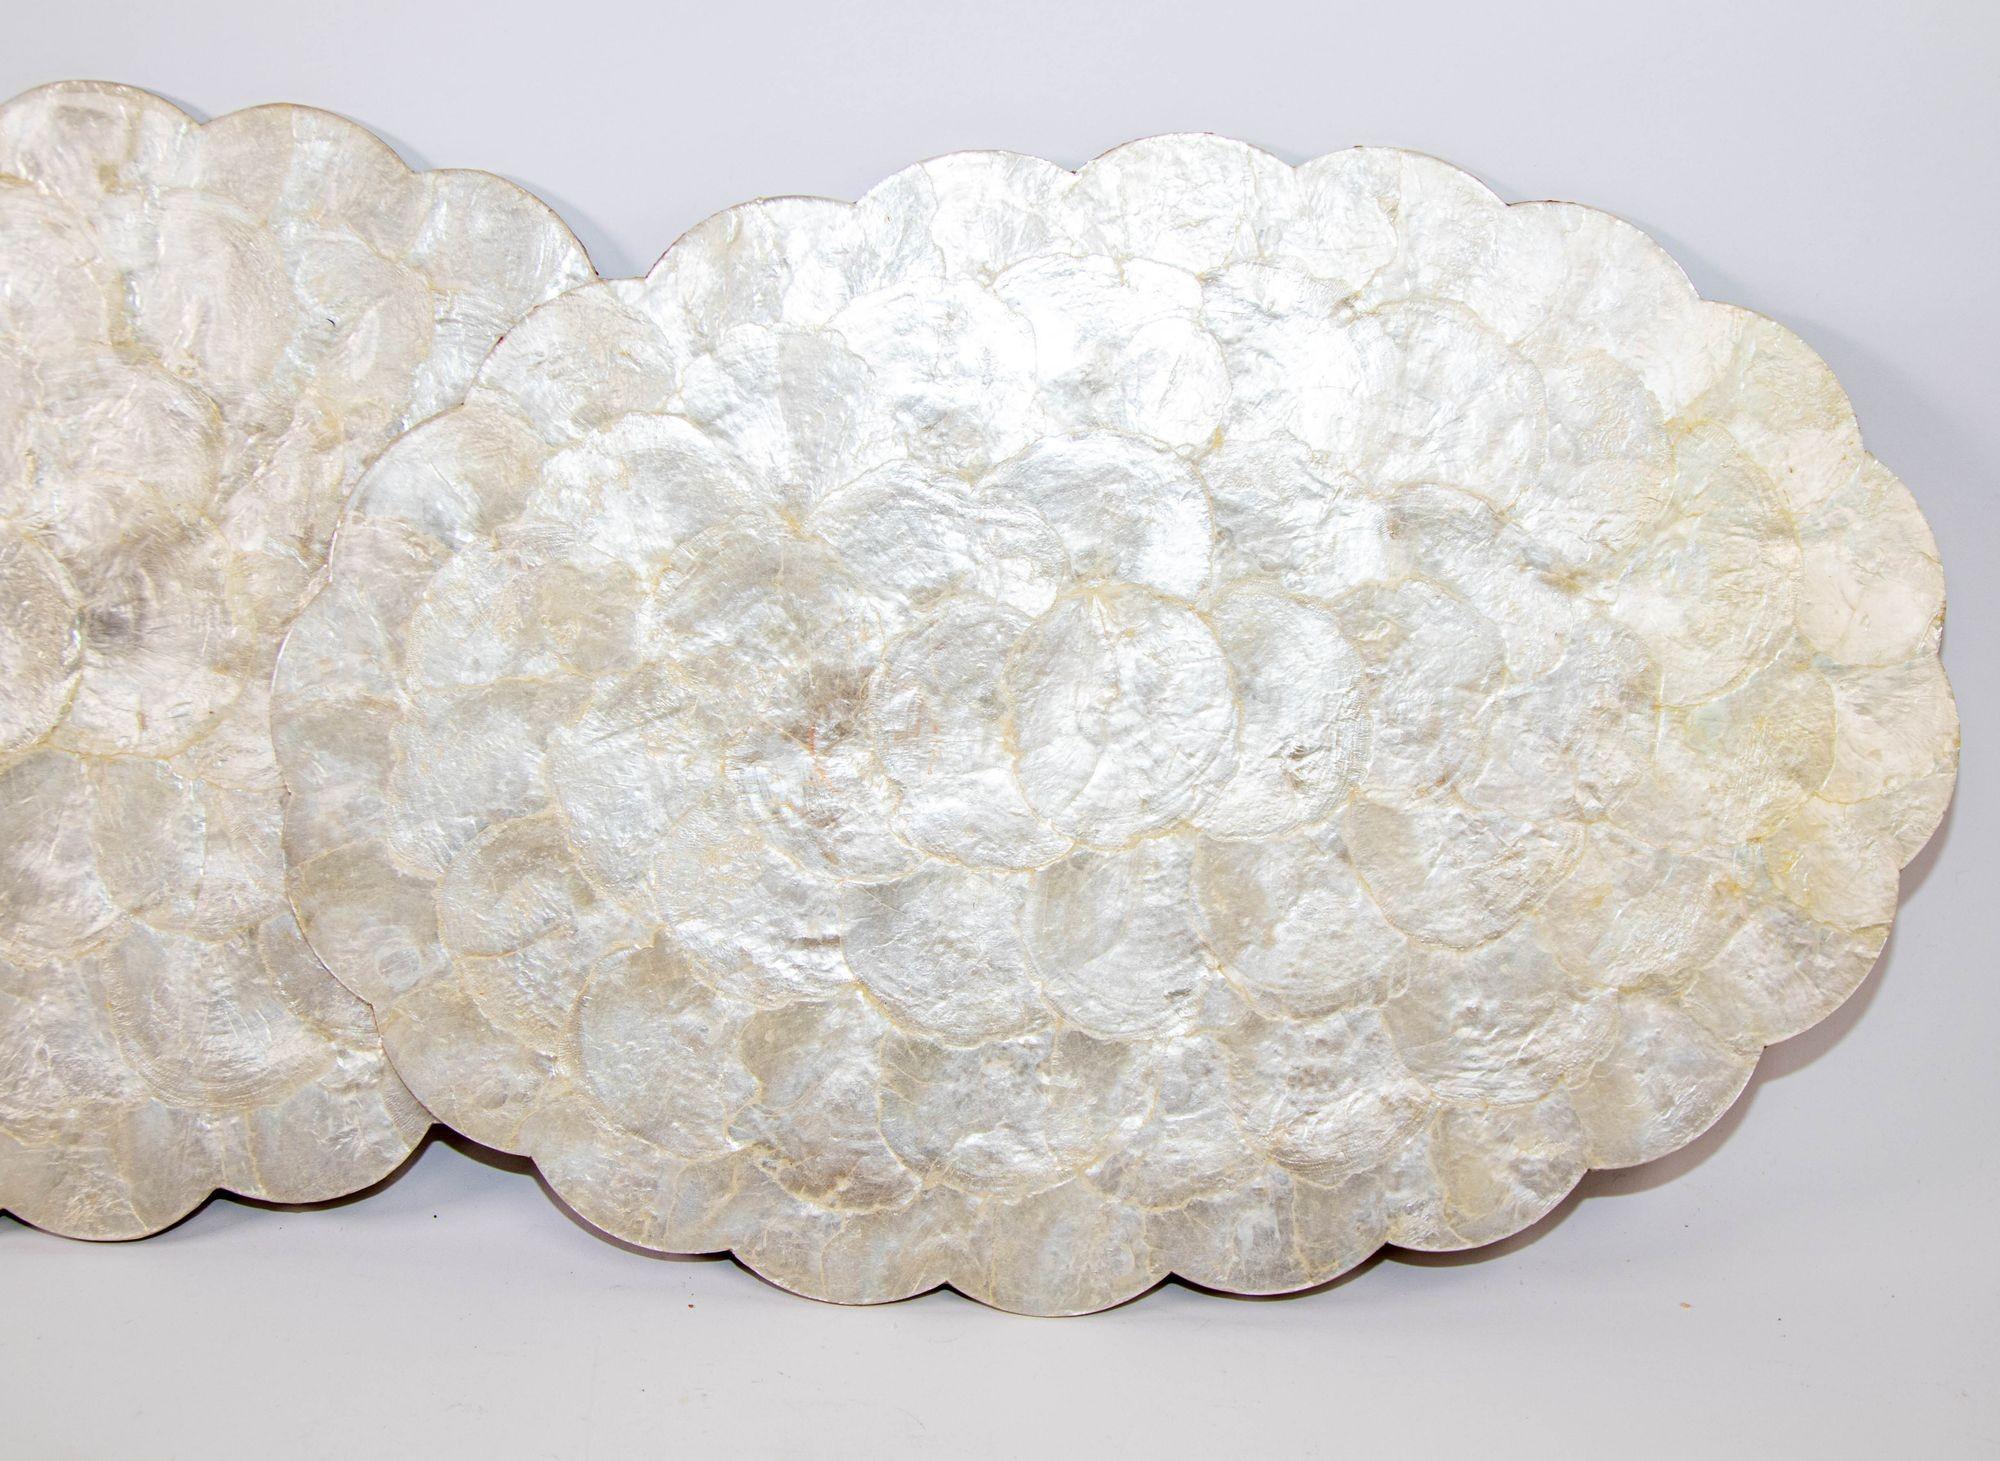 Hand-Crafted 1960s Hallie St Mary 2 Placemats in Natural Capiz Pearl Shell Scalloped Edge